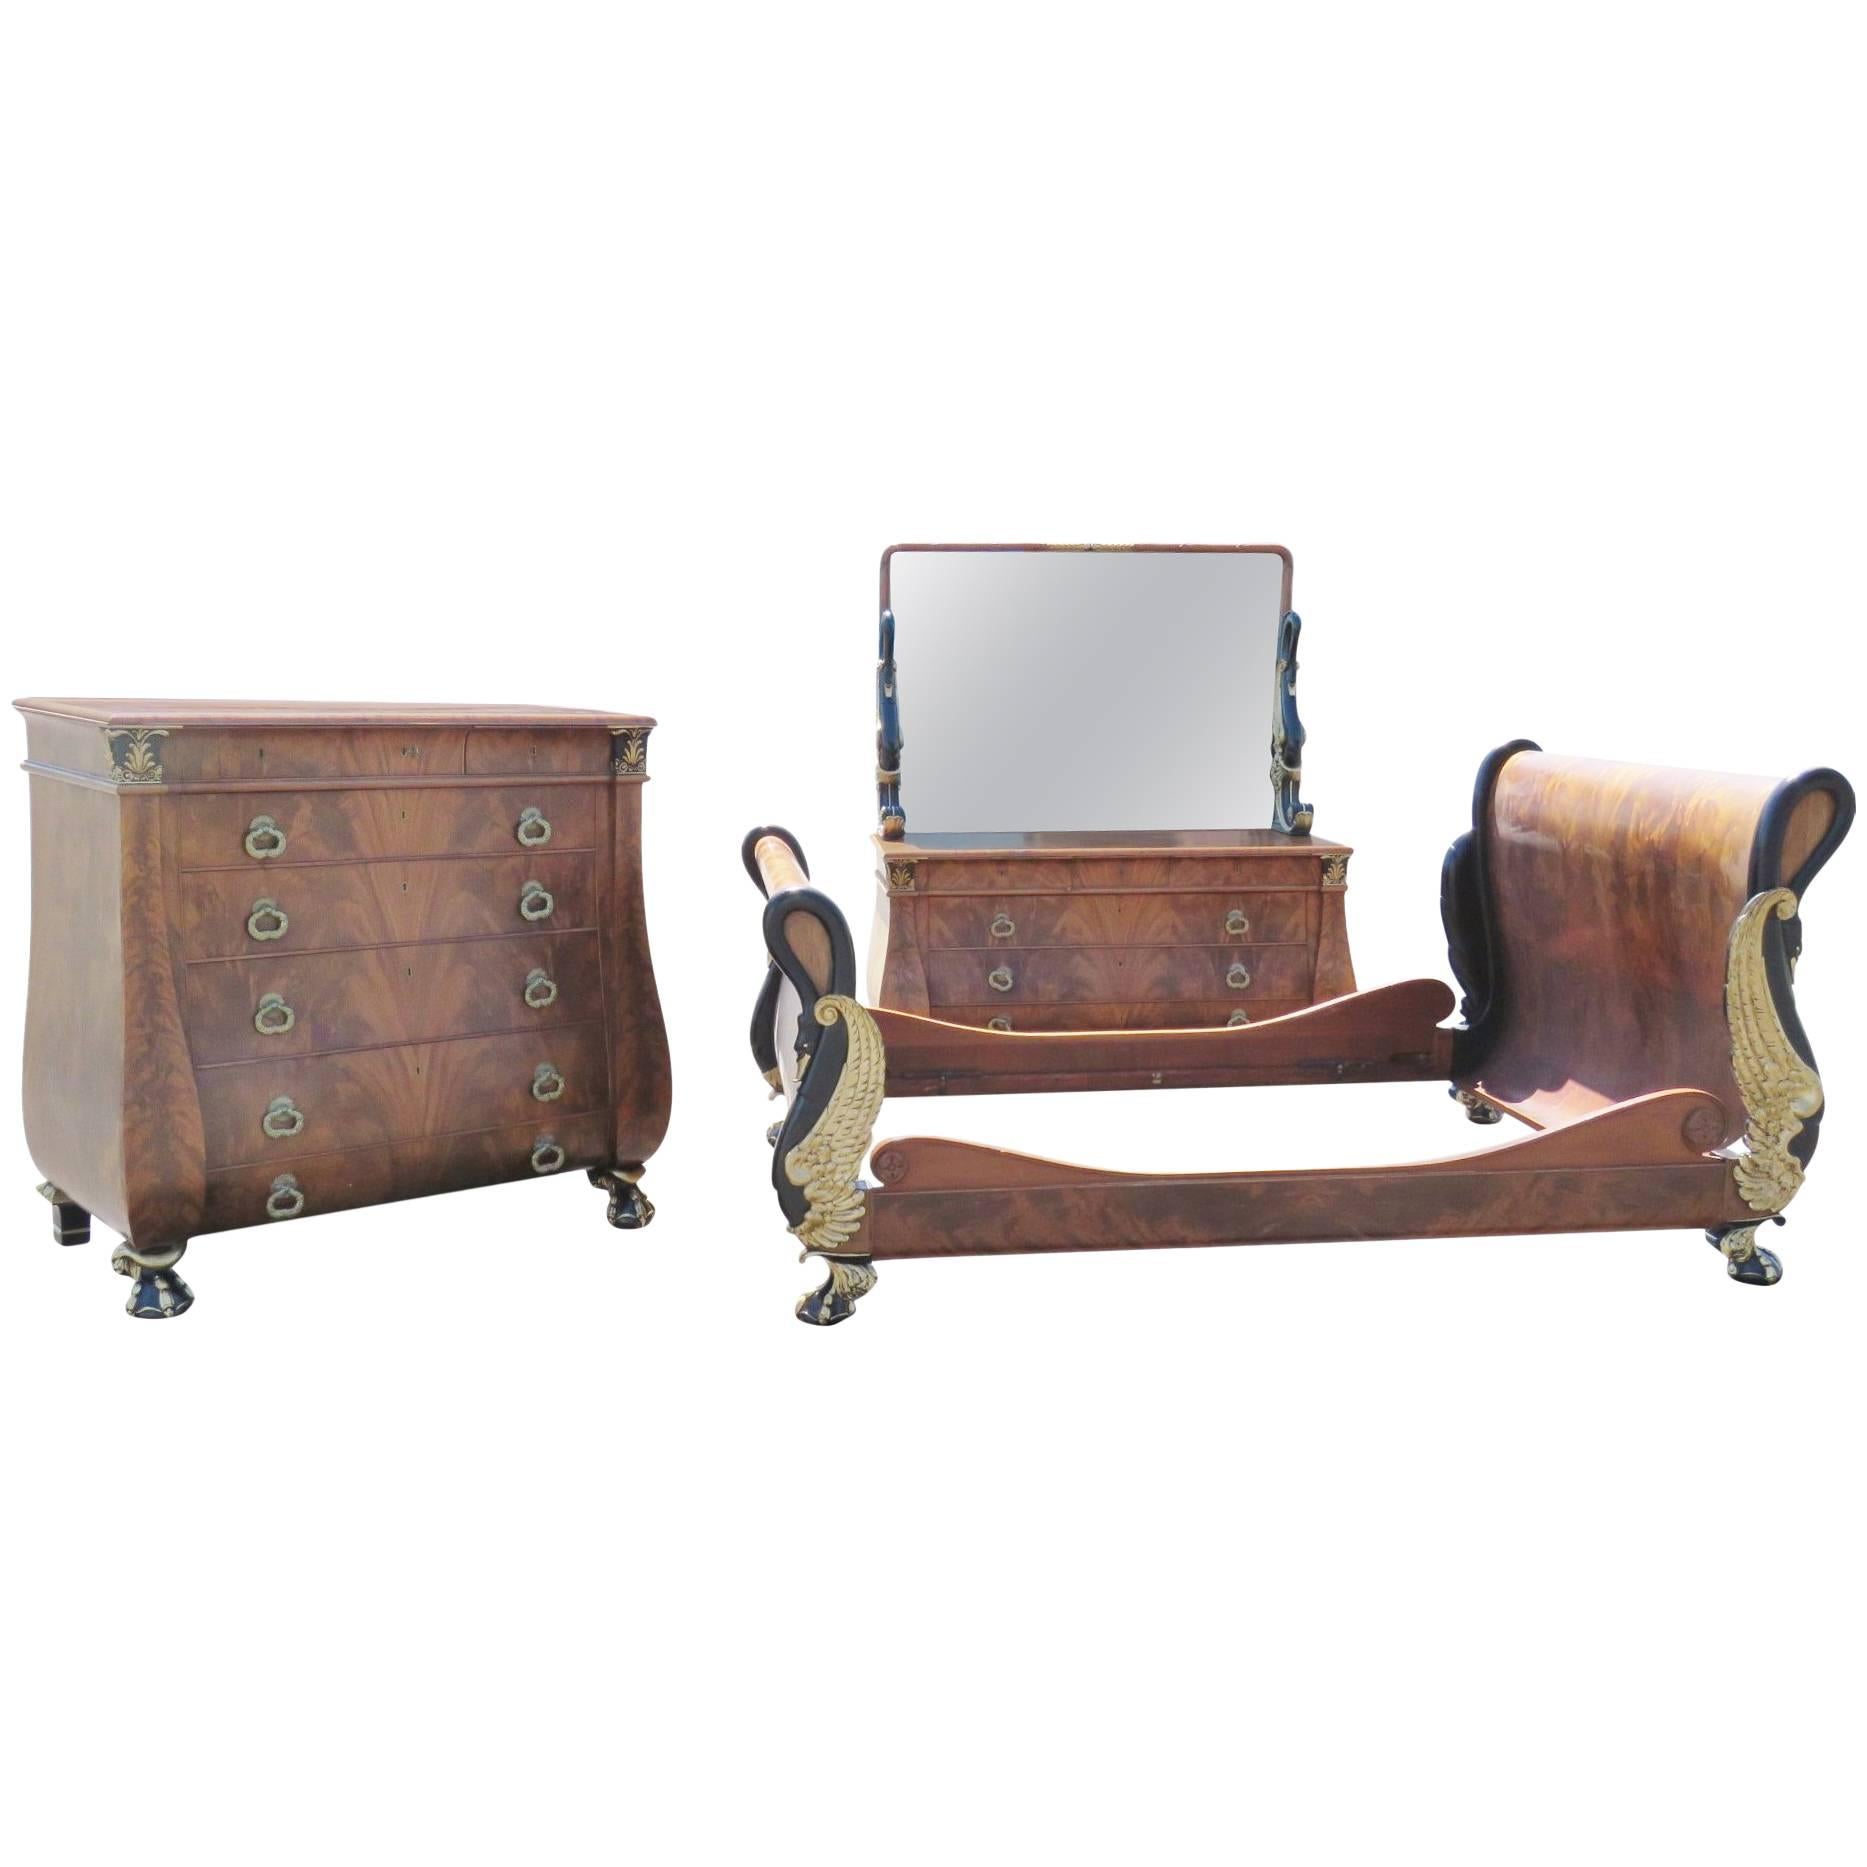 Magnificent Three-Peice French Empire Style Bedroom Set Mann, Charles Lannieure